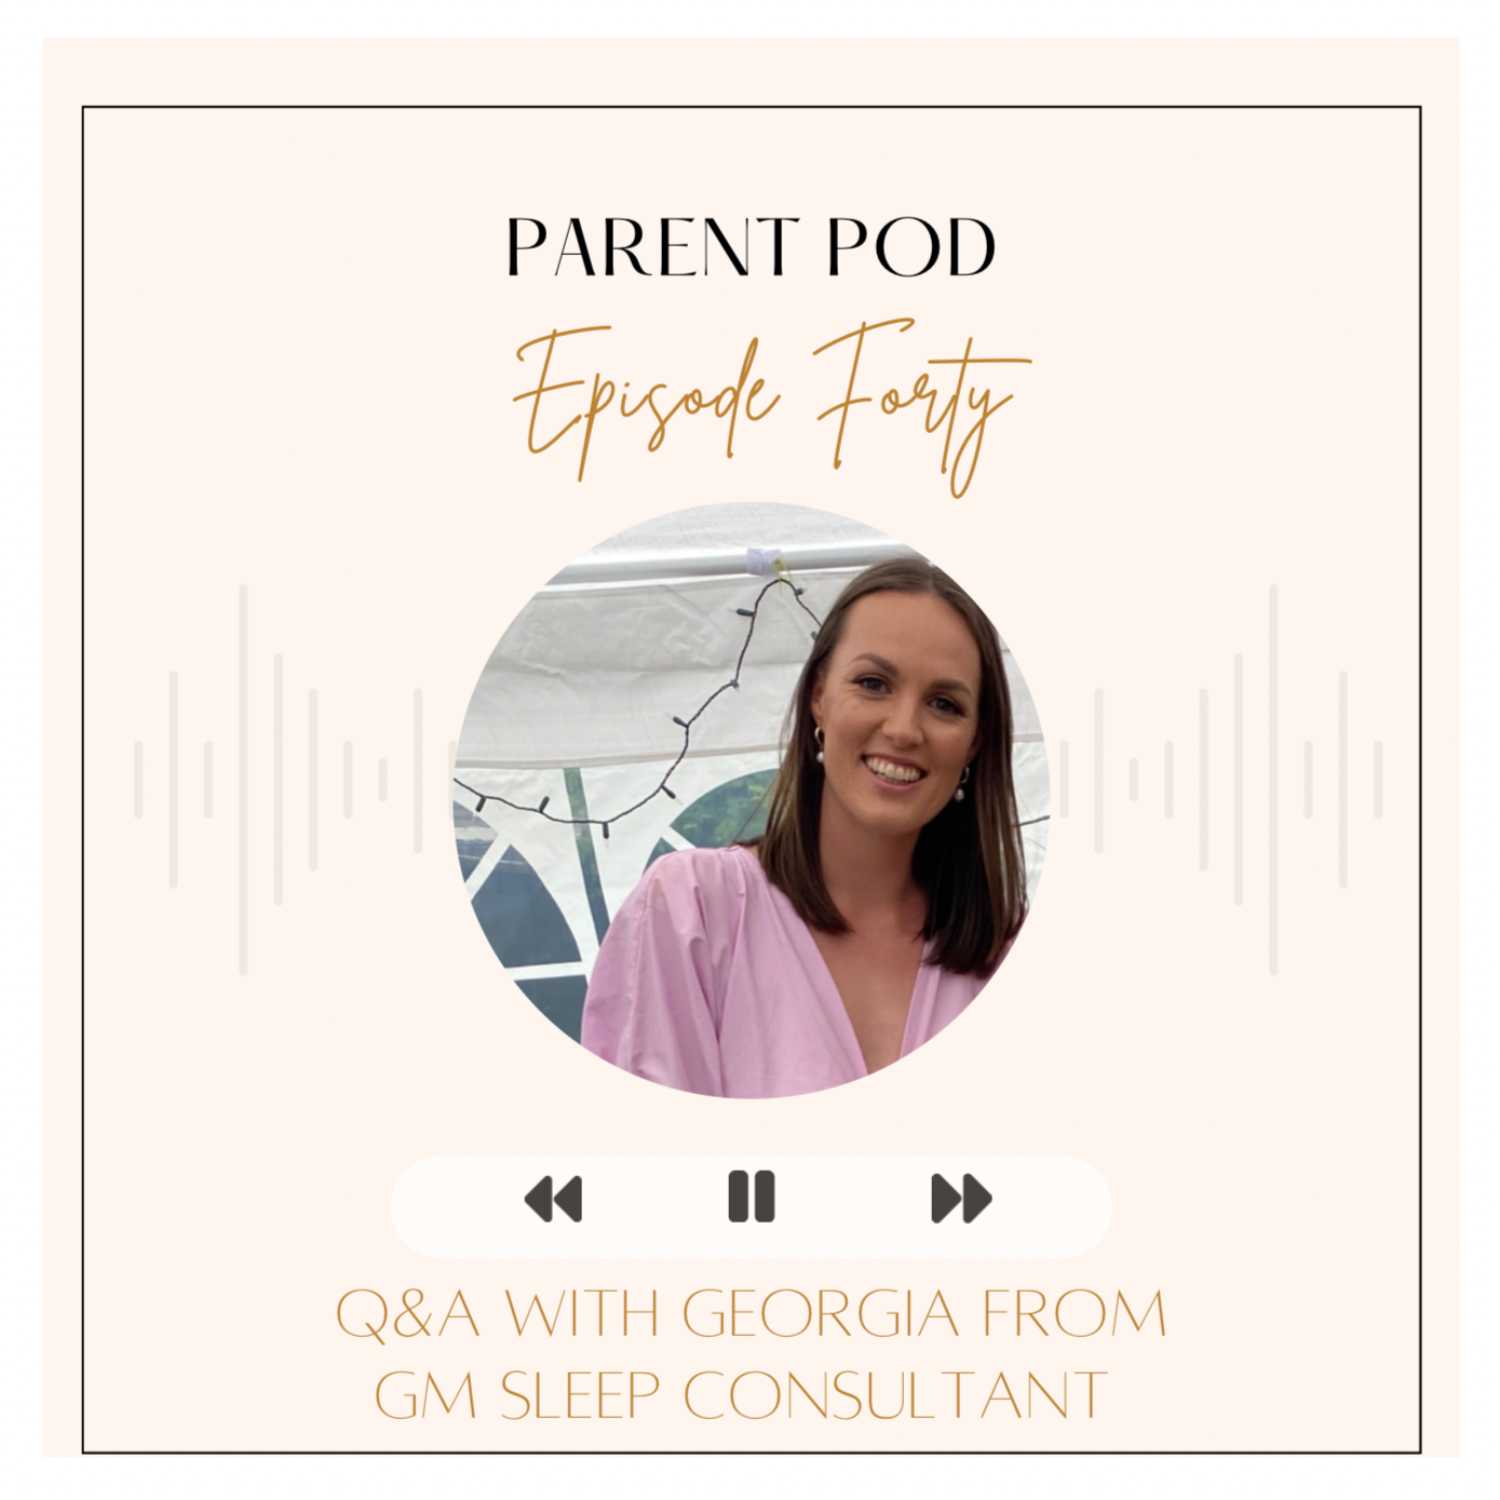 All of your sleep questions answered with Georgia (GM Sleep Consultant)